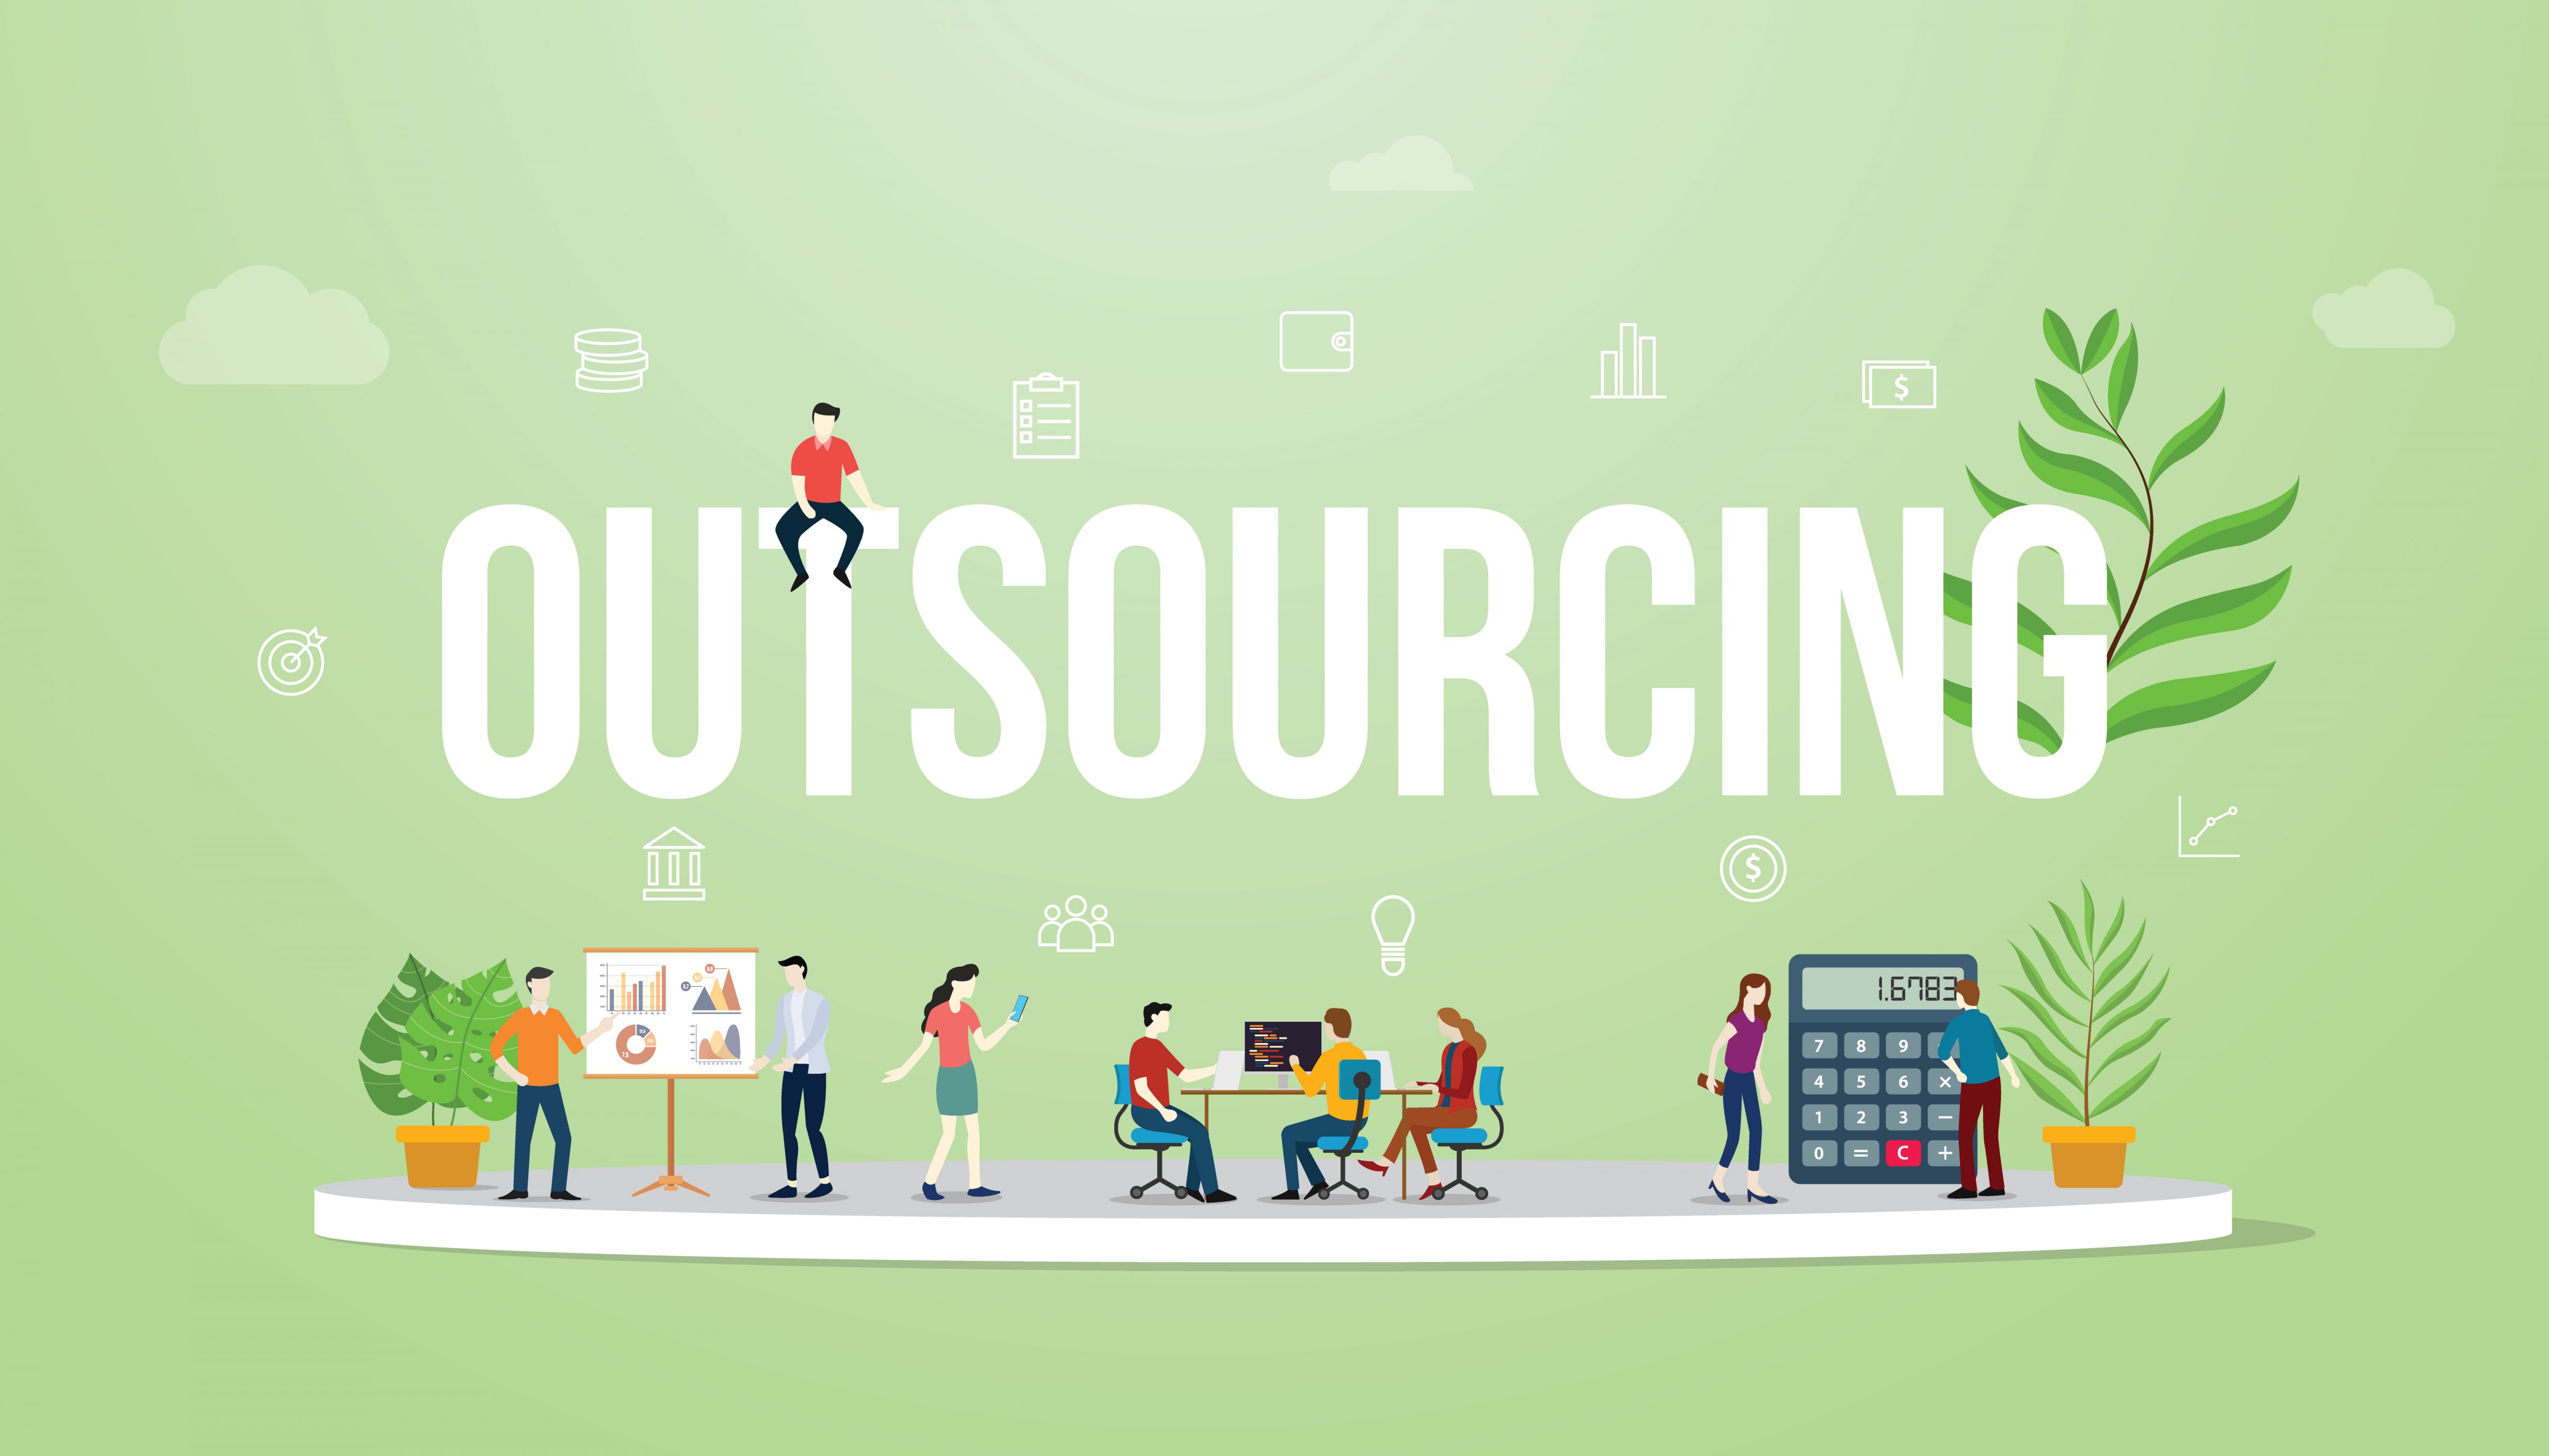 Why Business Process Outsourcing Is Critical for SMBs